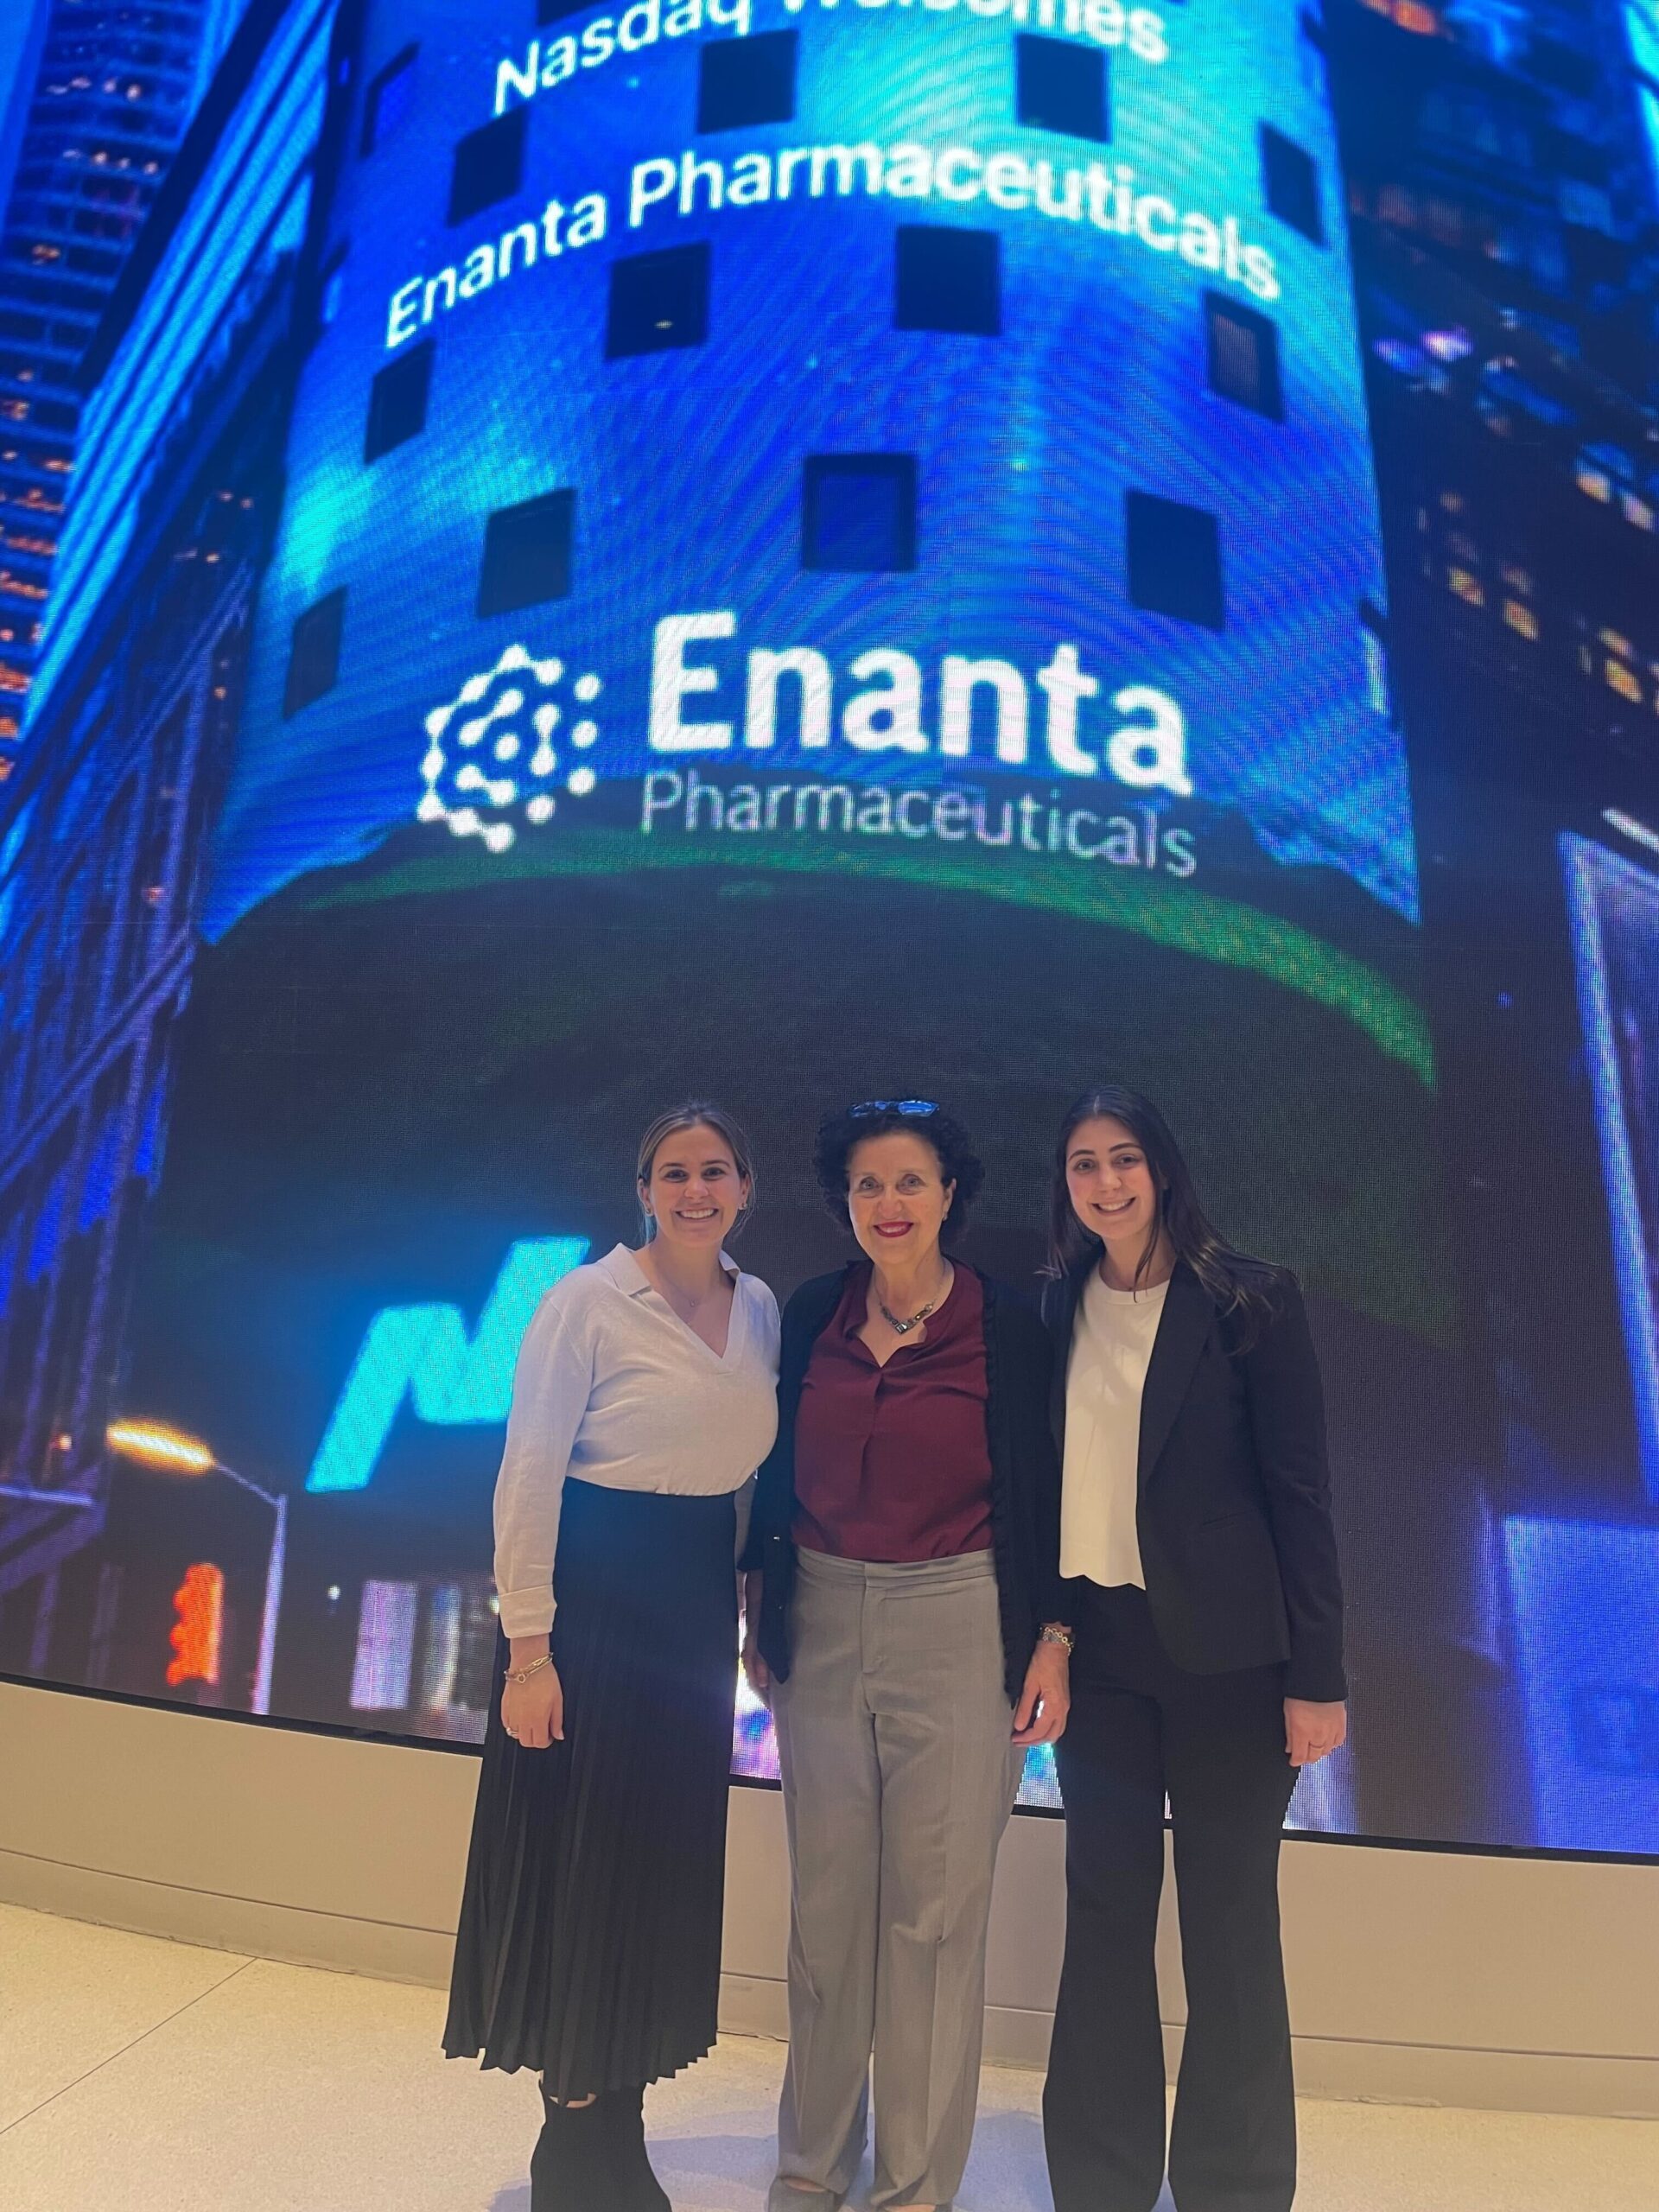 SternIR team outside Nasdaq MarketSite in Times Square NYC to support Enanta for the closing bell (March 21, 2023)